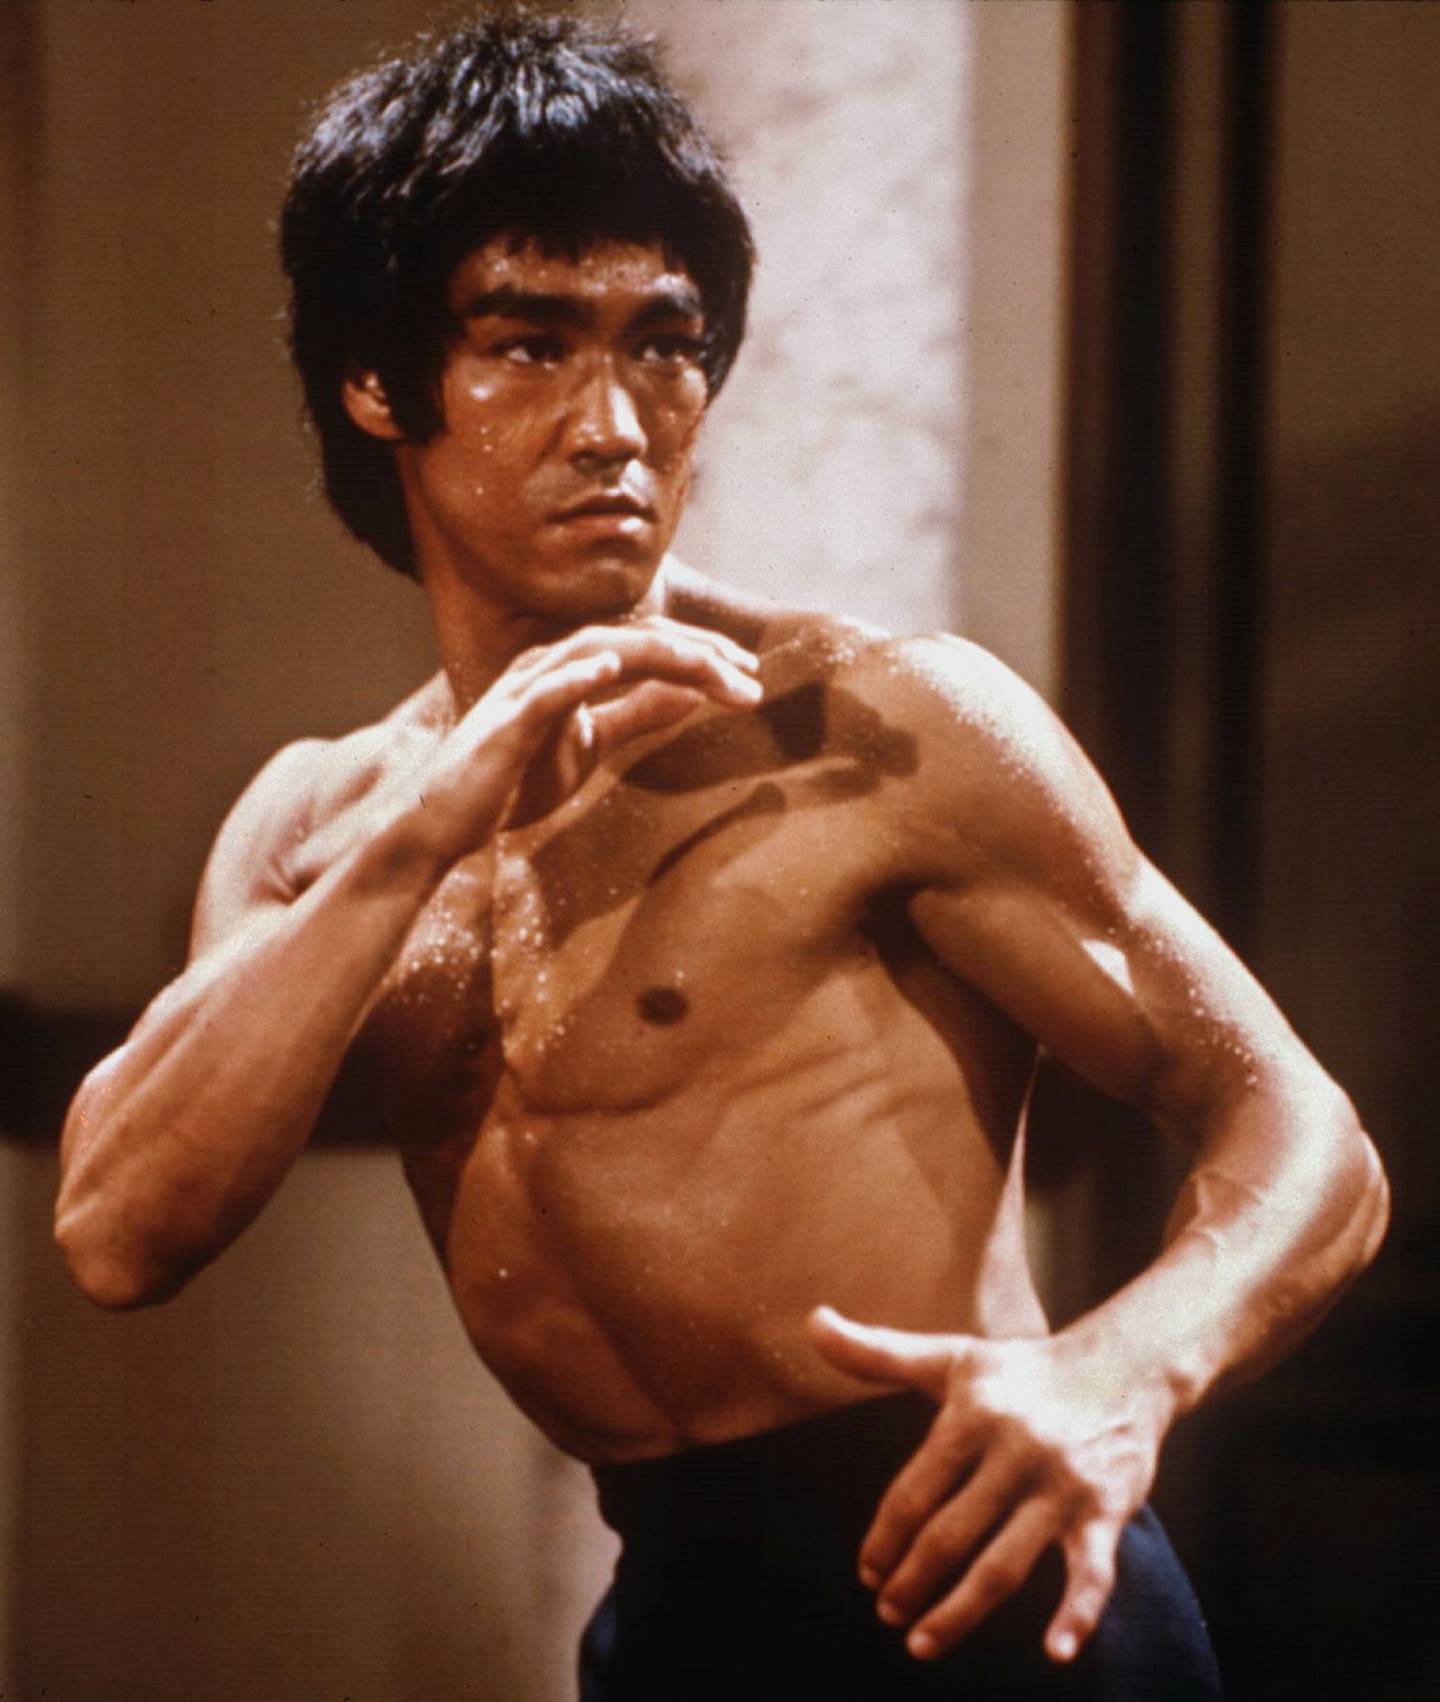 Doctors reveal Bruce Lee's real cause of death